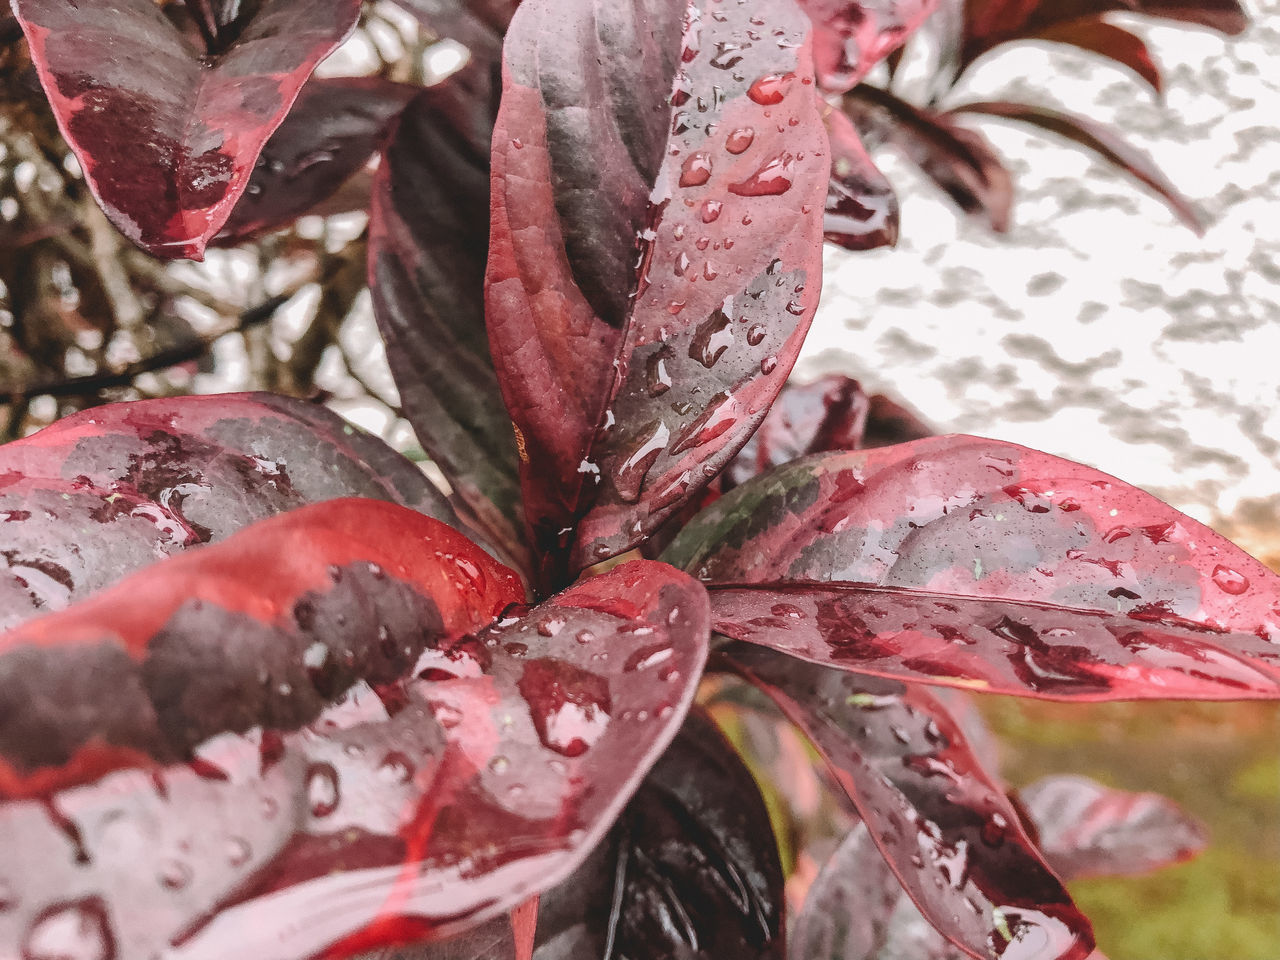 close-up, growth, red, plant, plant part, leaf, no people, beauty in nature, nature, day, wet, focus on foreground, drop, selective focus, outdoors, water, rain, freshness, raindrop, leaves, change, maroon, rainy season, dew, purity